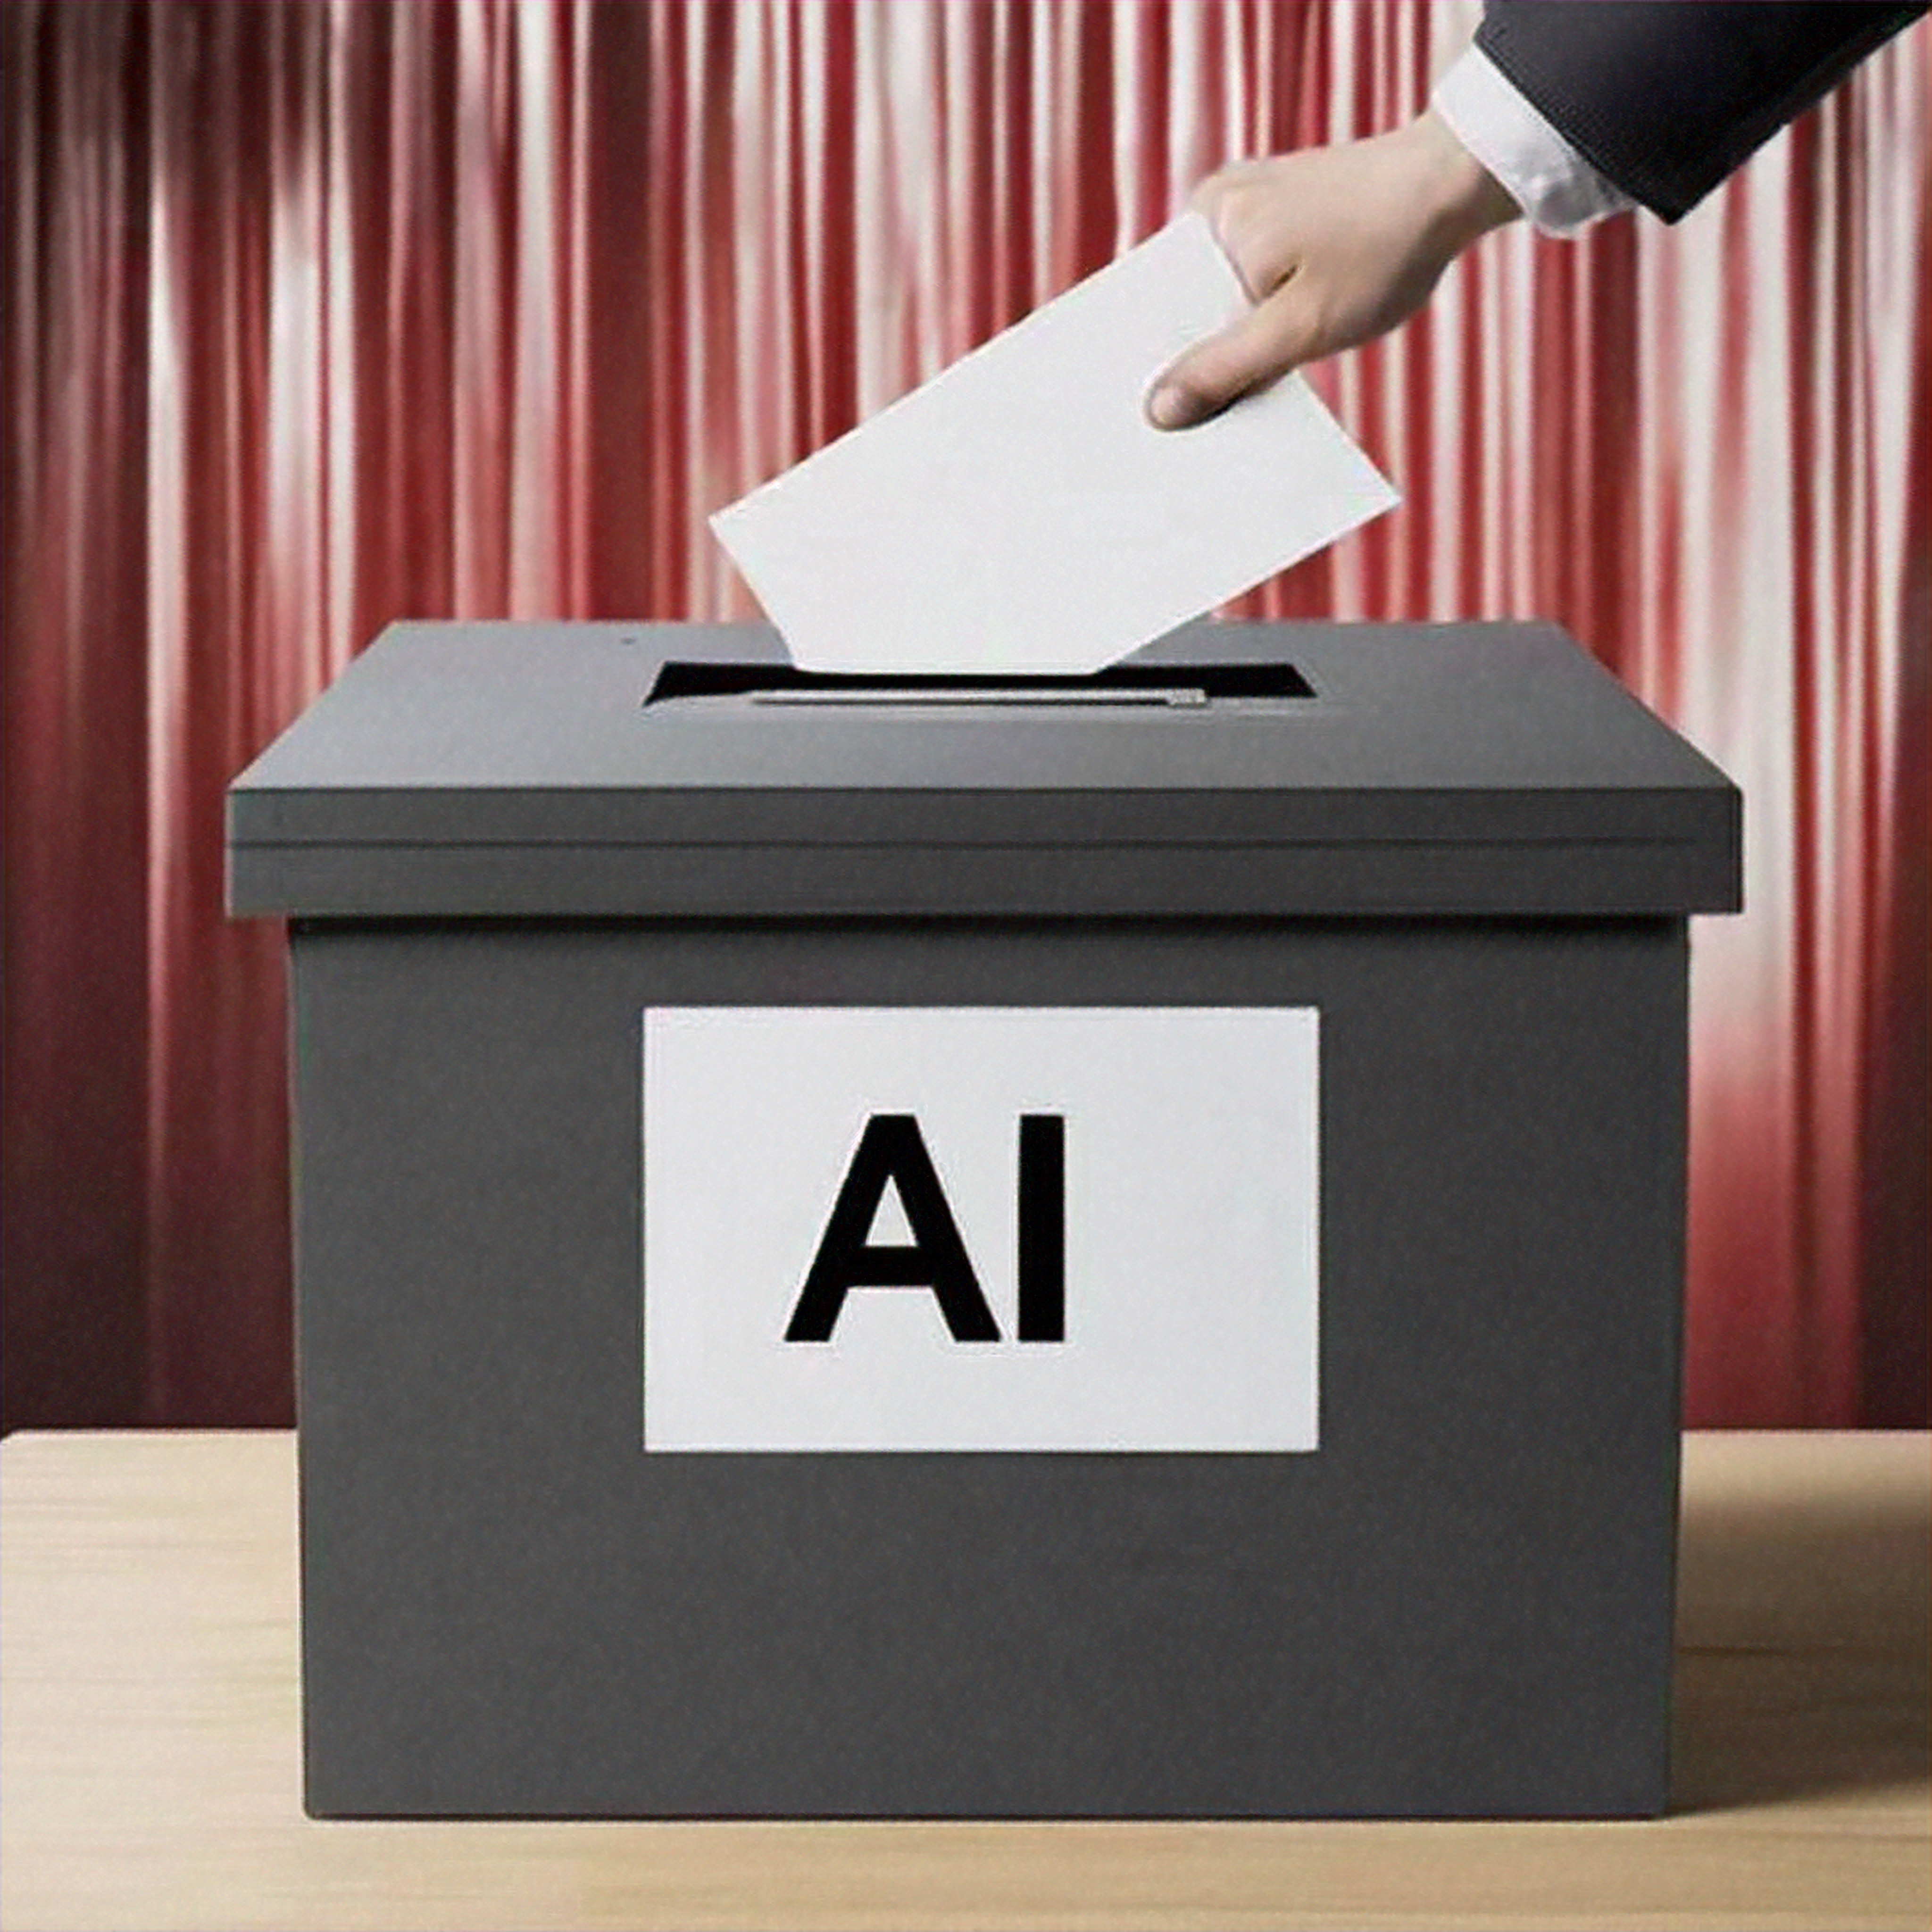 AI may be default ‘kingmaker’ this year in biggest-ever worldwide elections